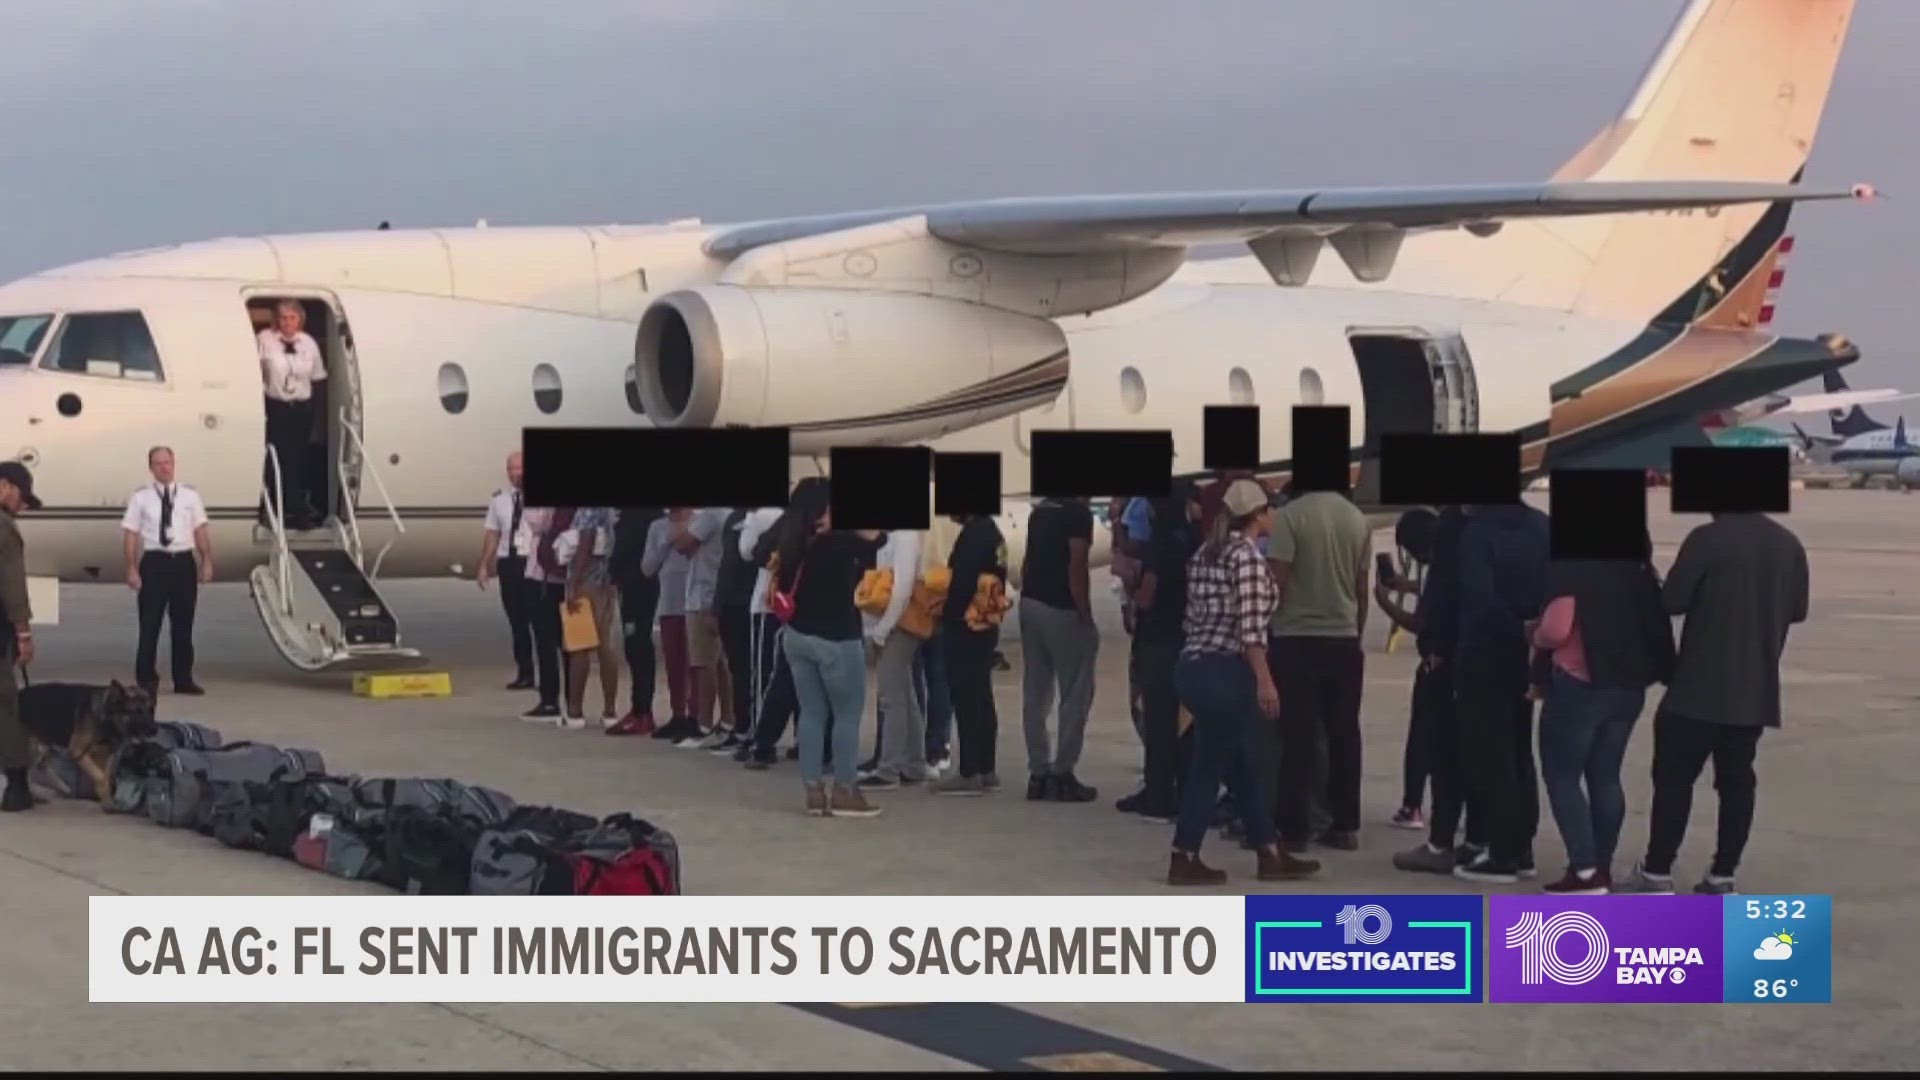 10 Investigates Jennifer Titus has been looking into the state's Migrant Relocation Program since the first flight we told you about to Martha's Vineyard last year.